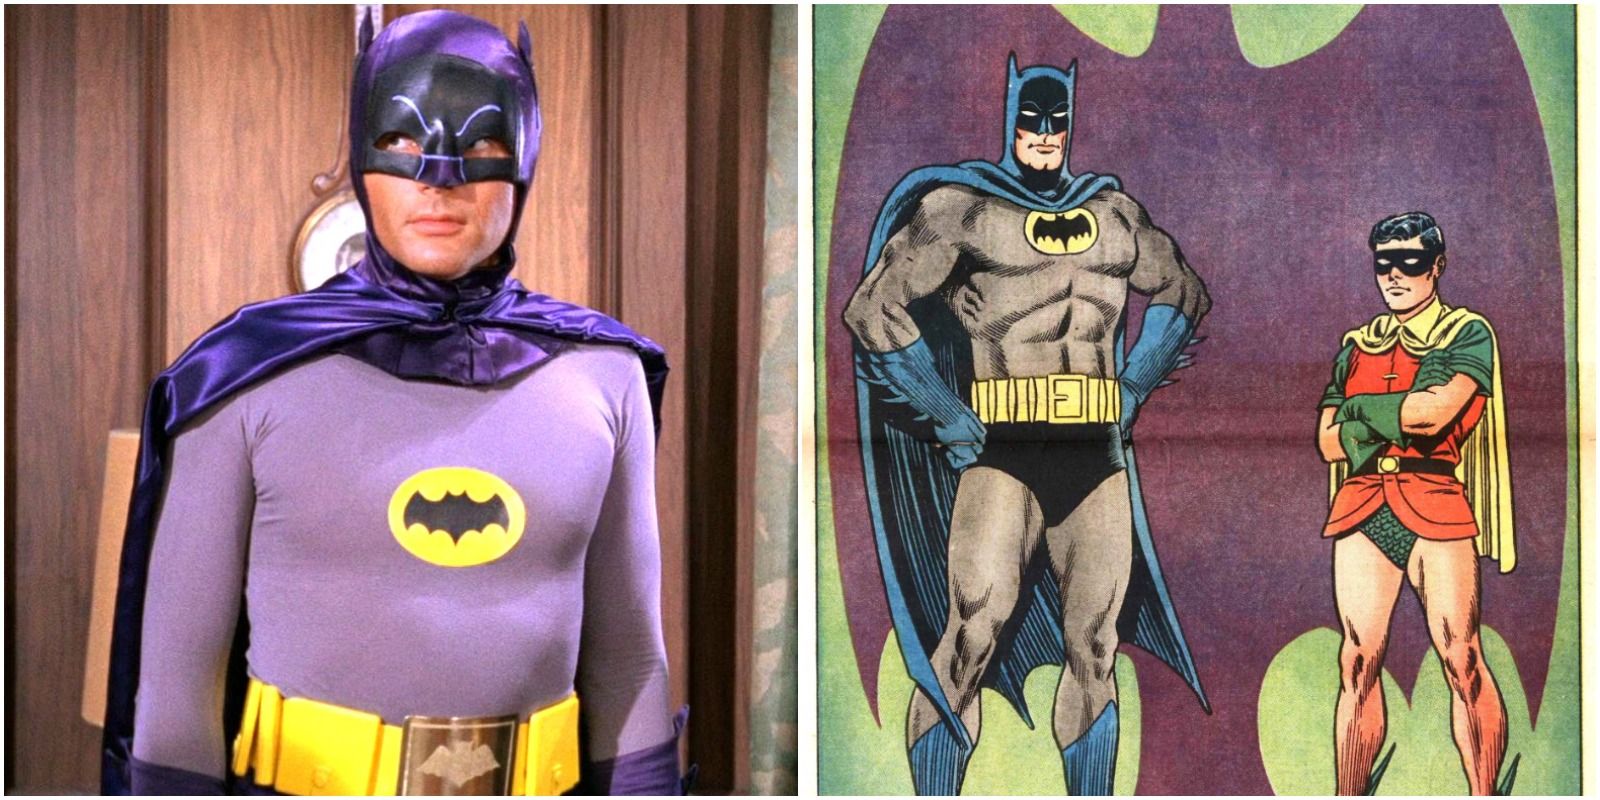 Accurate 1966 Batman Suit Compared to Comics